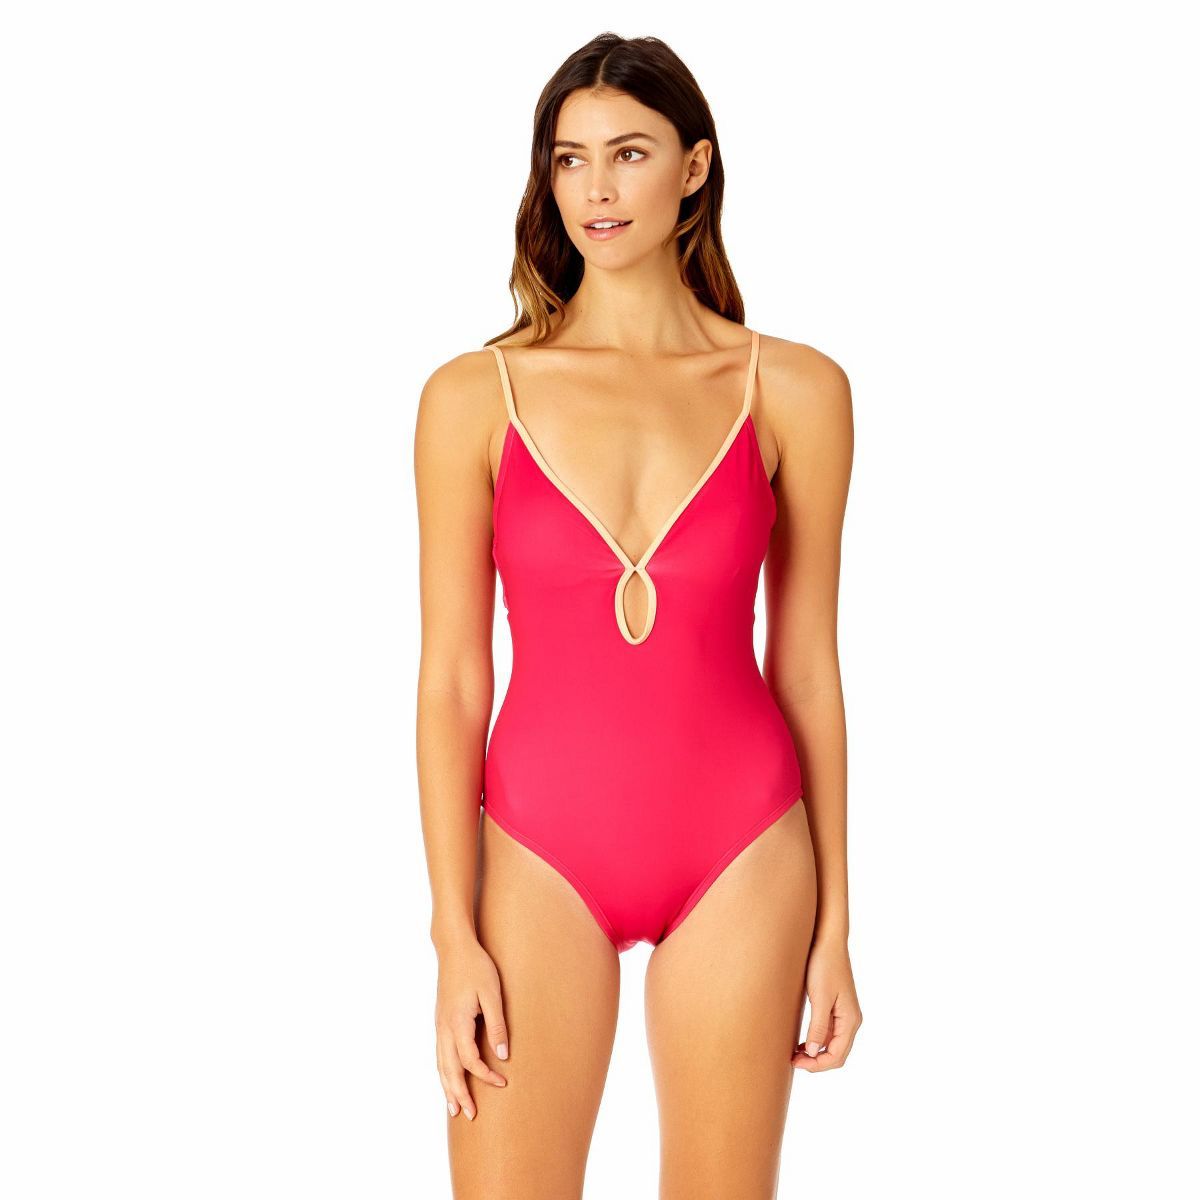 Coppersuit Women's Solid Piped Keyhole One Piece Swimsuit | Target